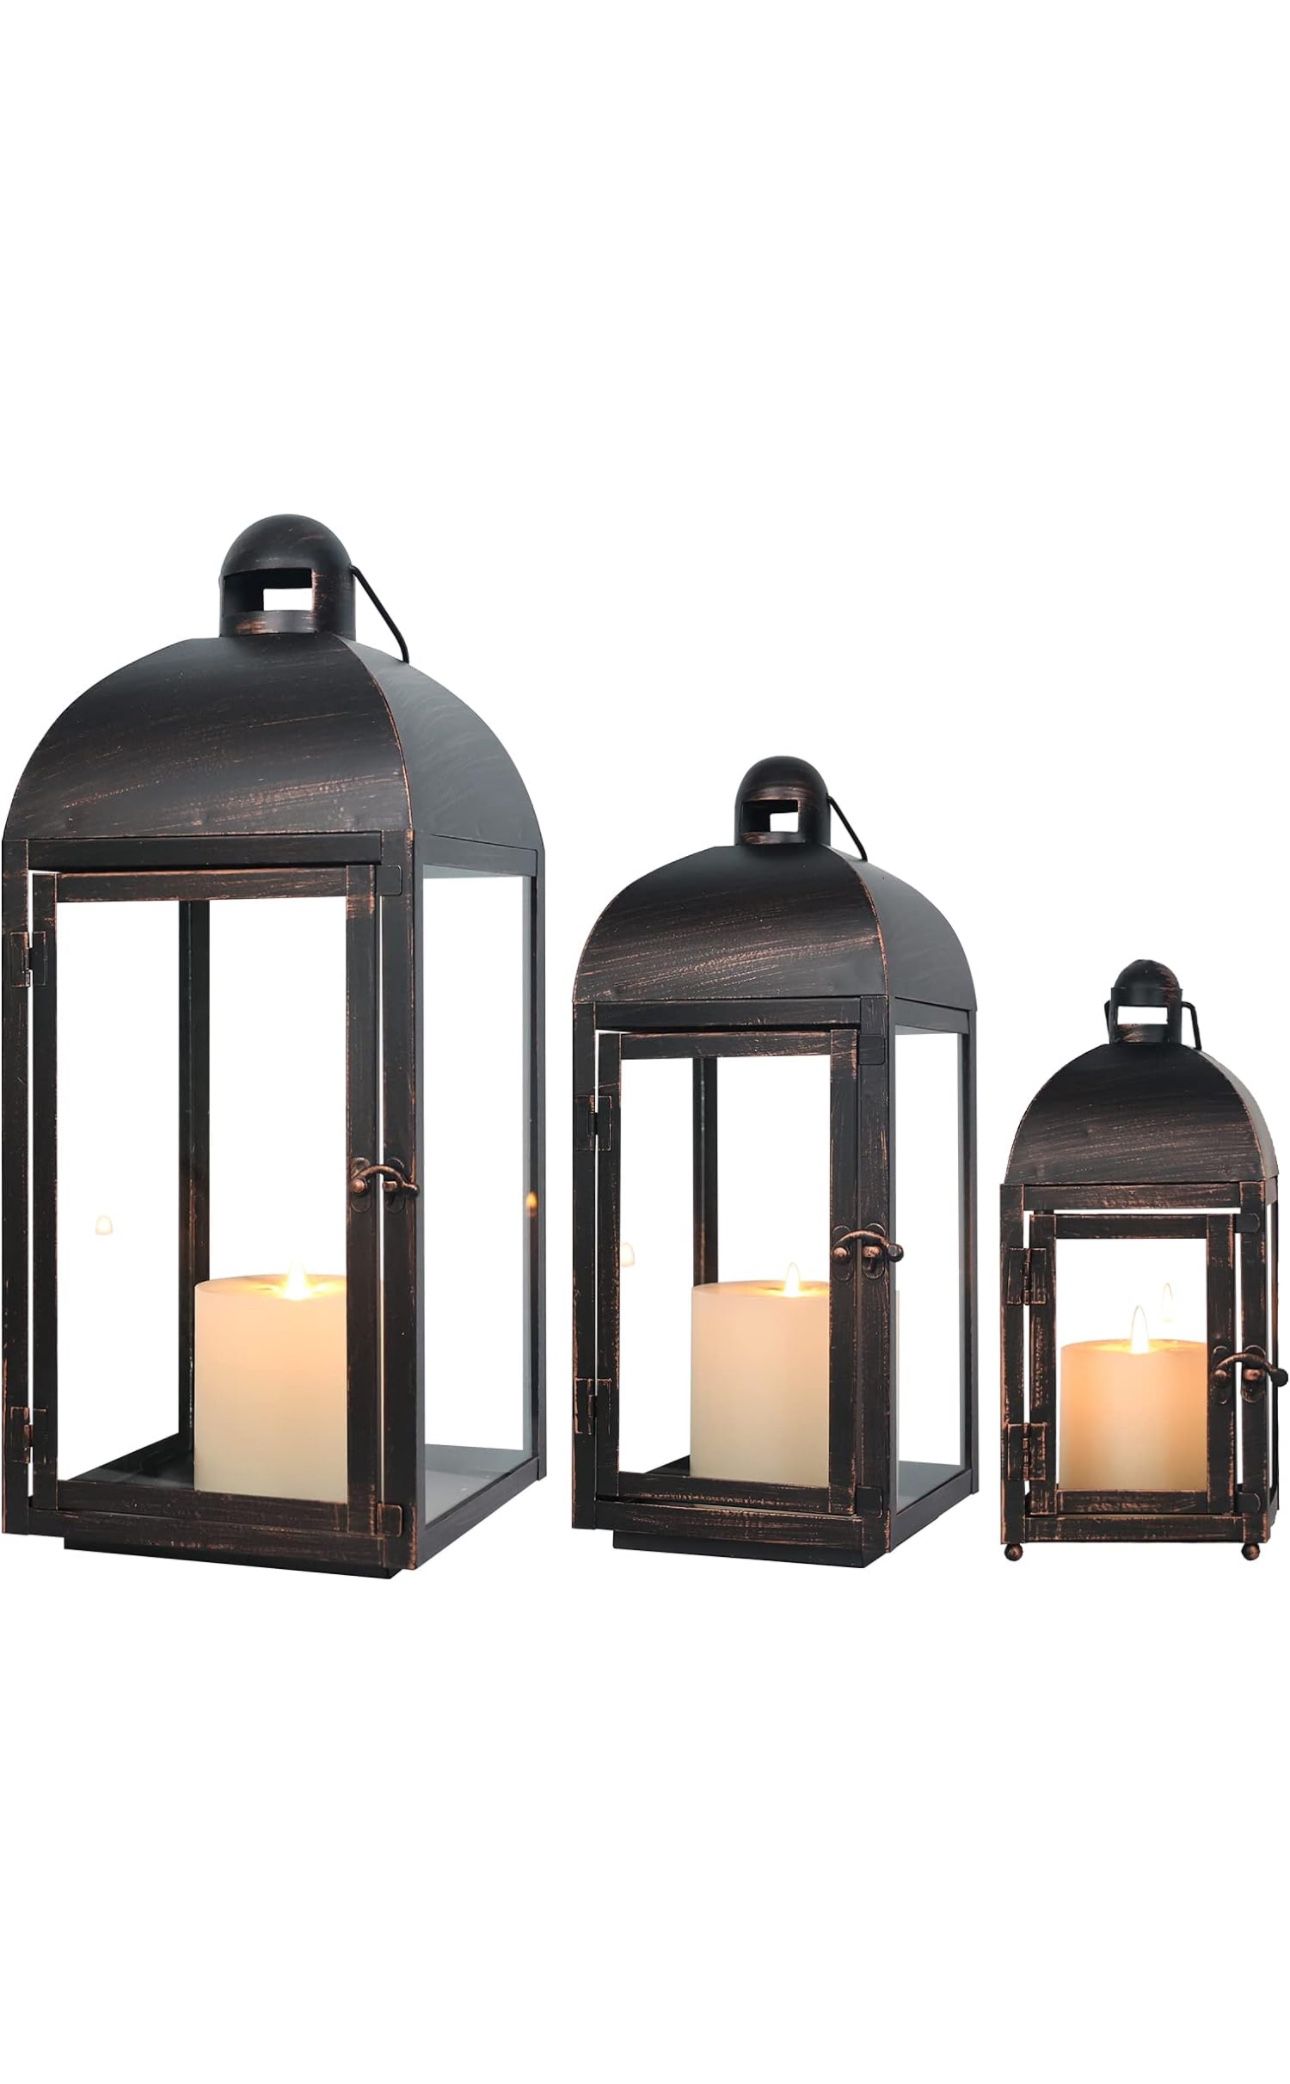 Brand New 3Pack Outdoor Lantern, Front Porch Decor, 23" Large Candle Lanterns Decorative Indoor, Metal Frame with Glass, Vintage Farmhouse Home, Patio